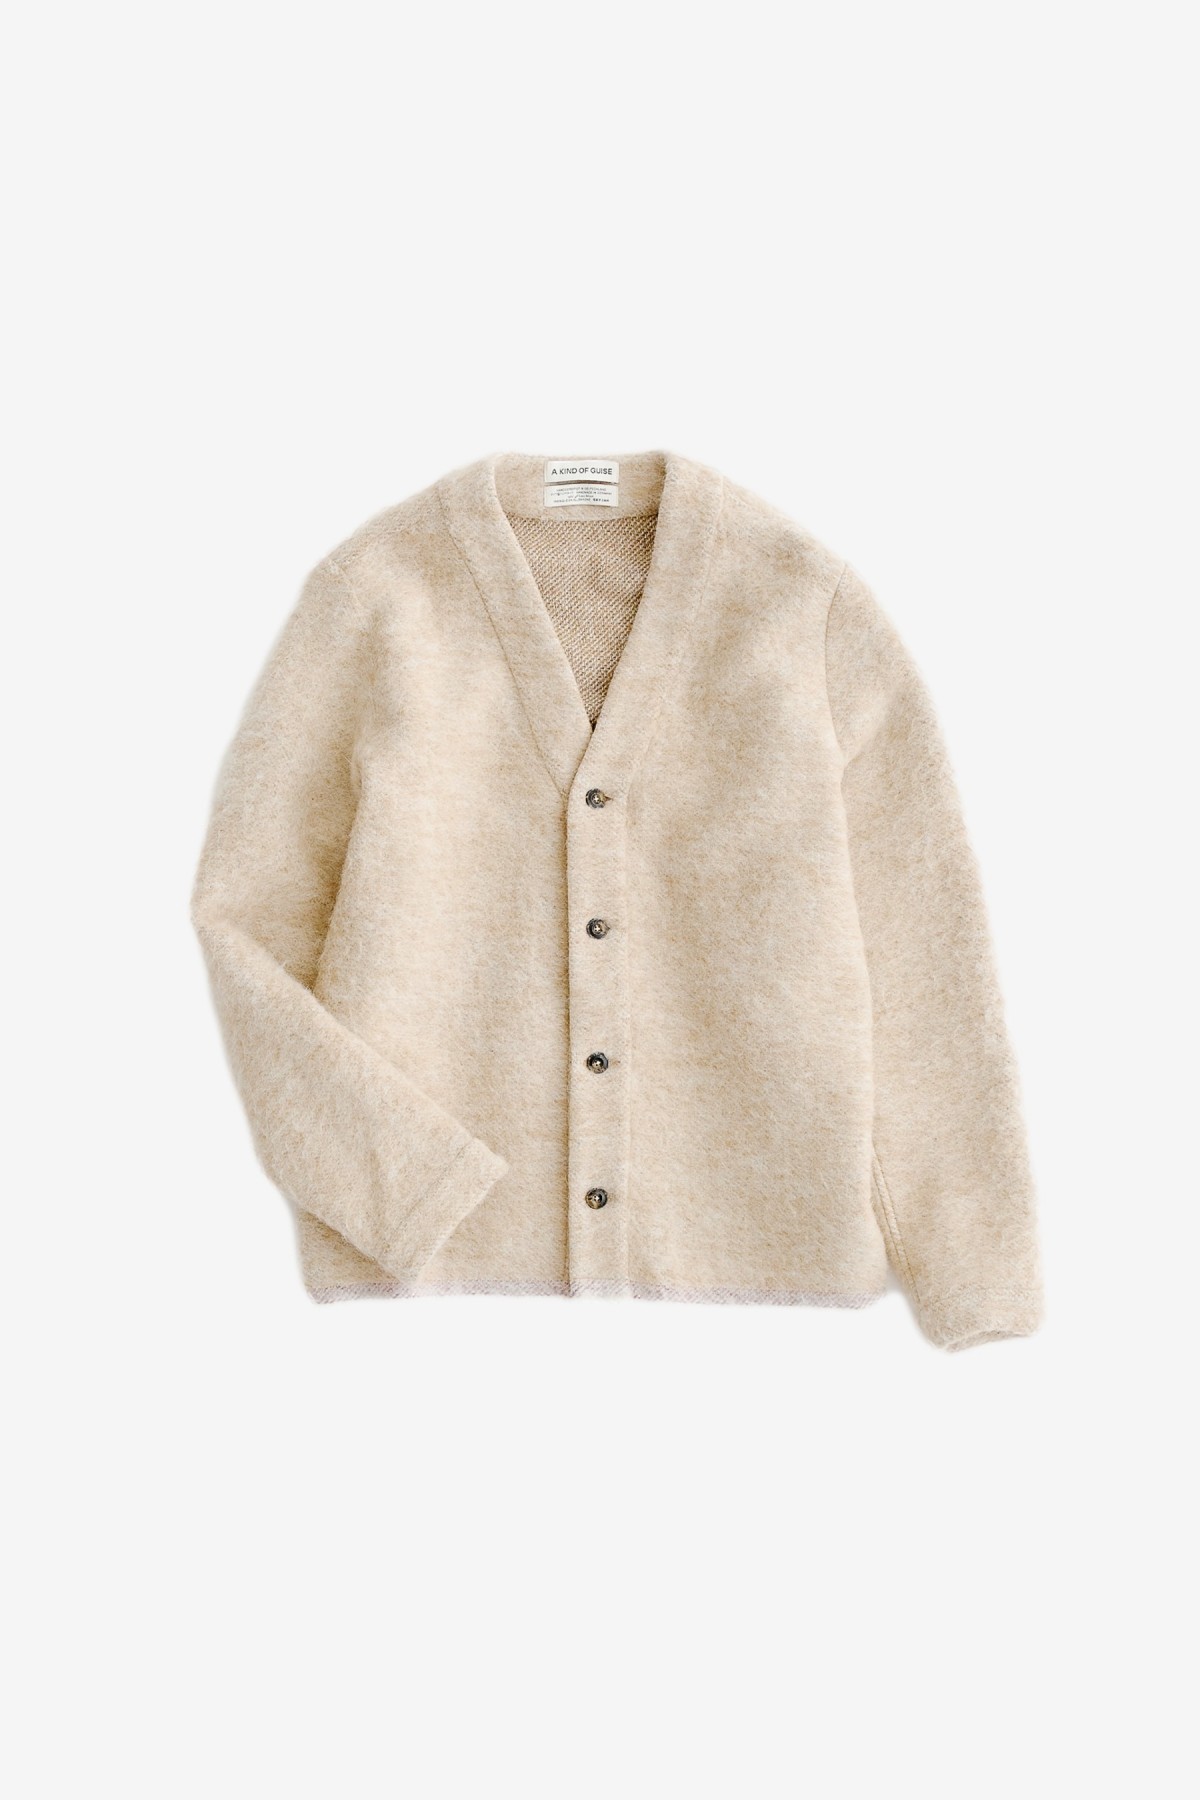 A Kind of Guise Kura Cardigan in Fuzzy Sesame